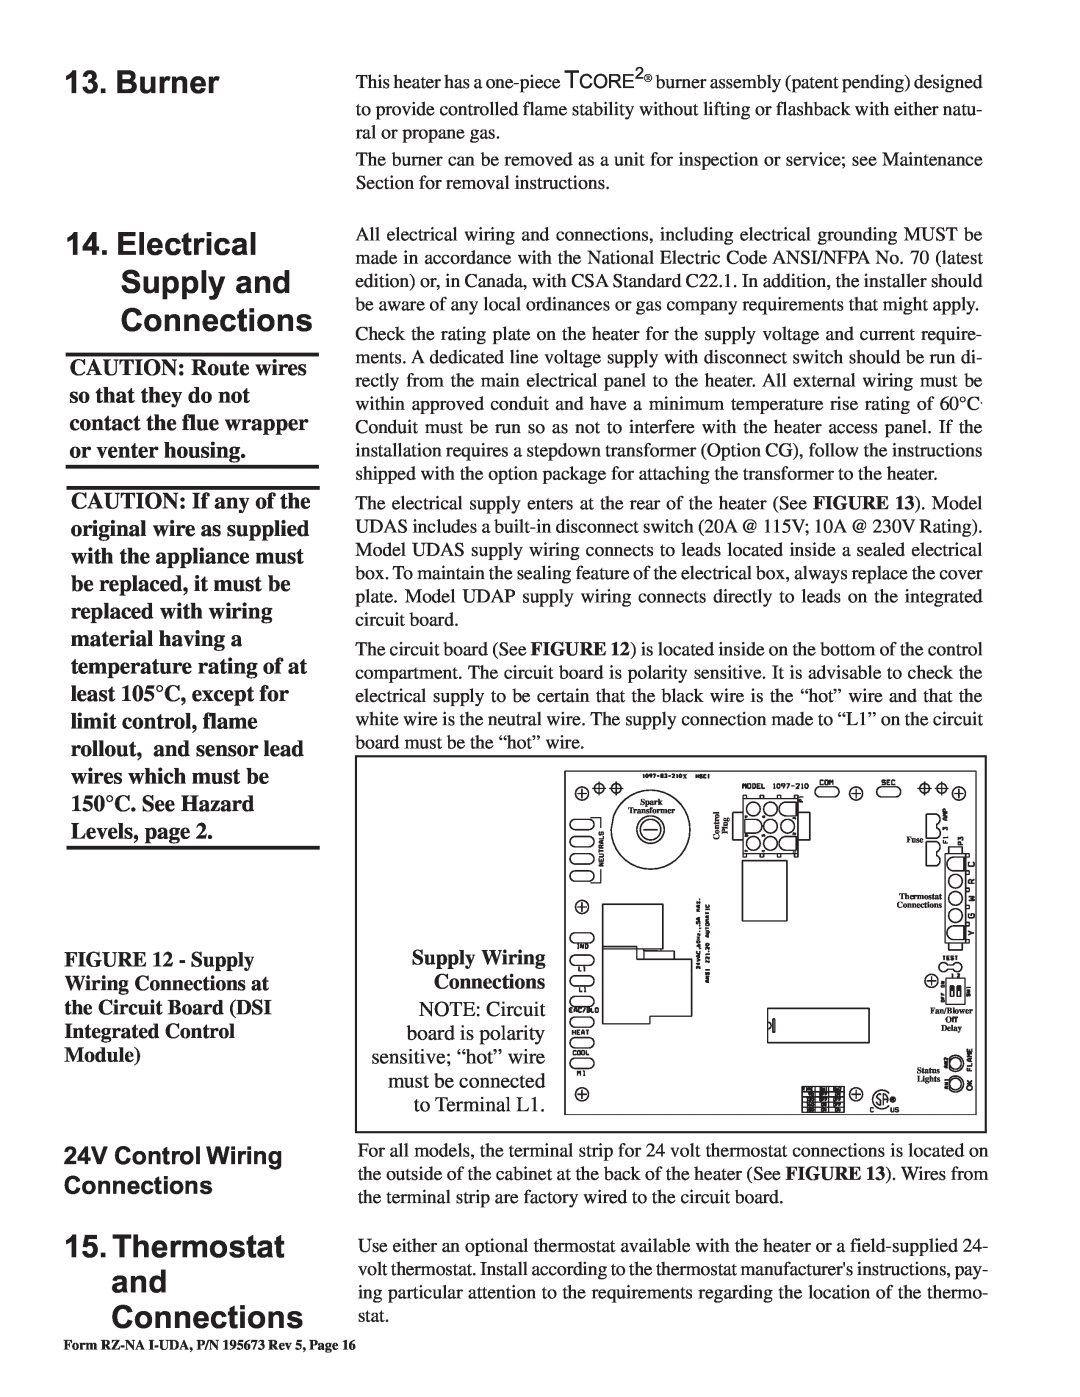 Thomas & Betts UDAS Burner 14.Electrical Supply and Connections, Thermostat and Connections, Supply Wiring Connections at 